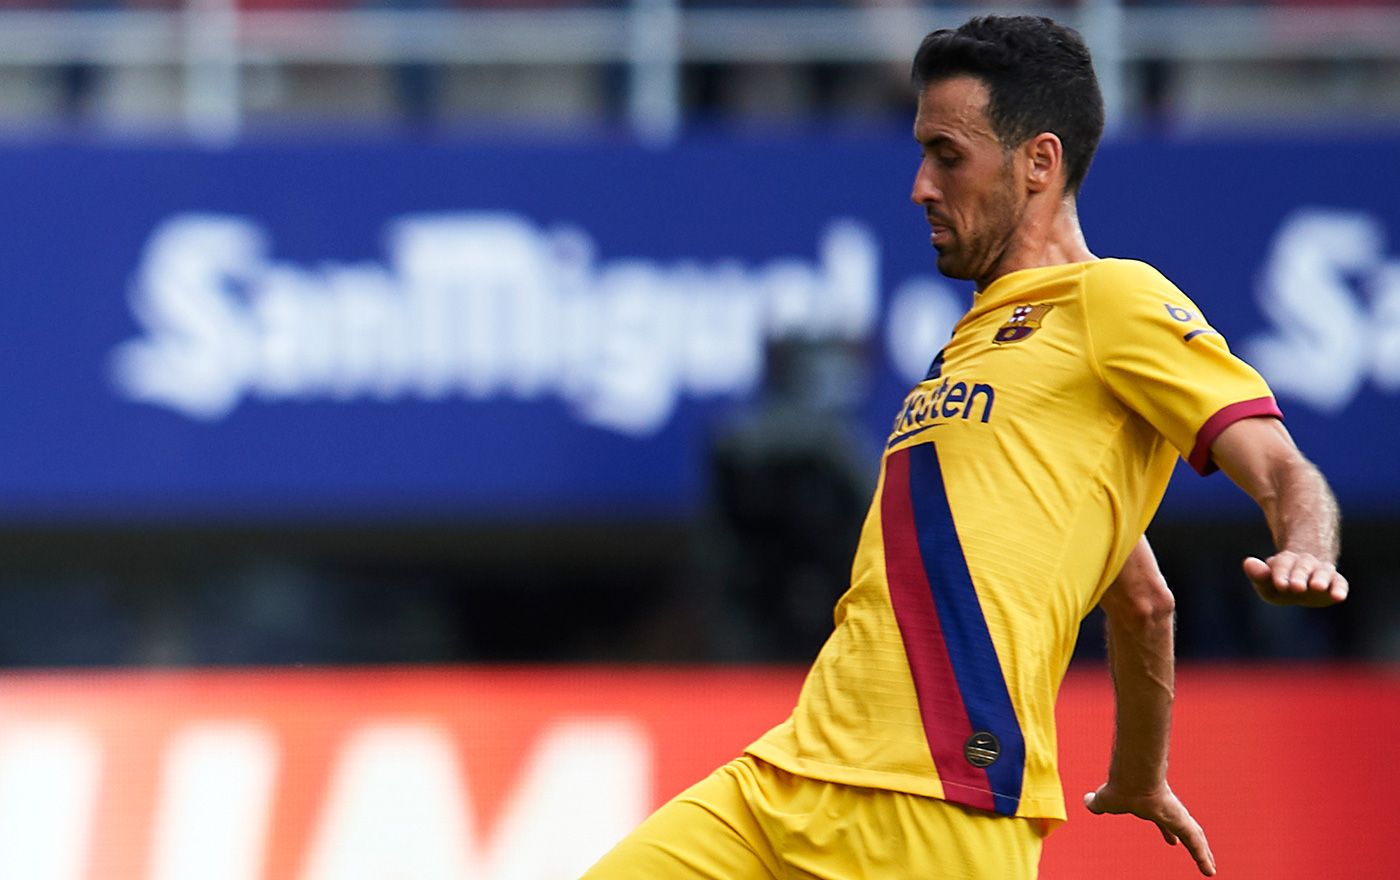 Sergio Busquets in the party against the Eibar